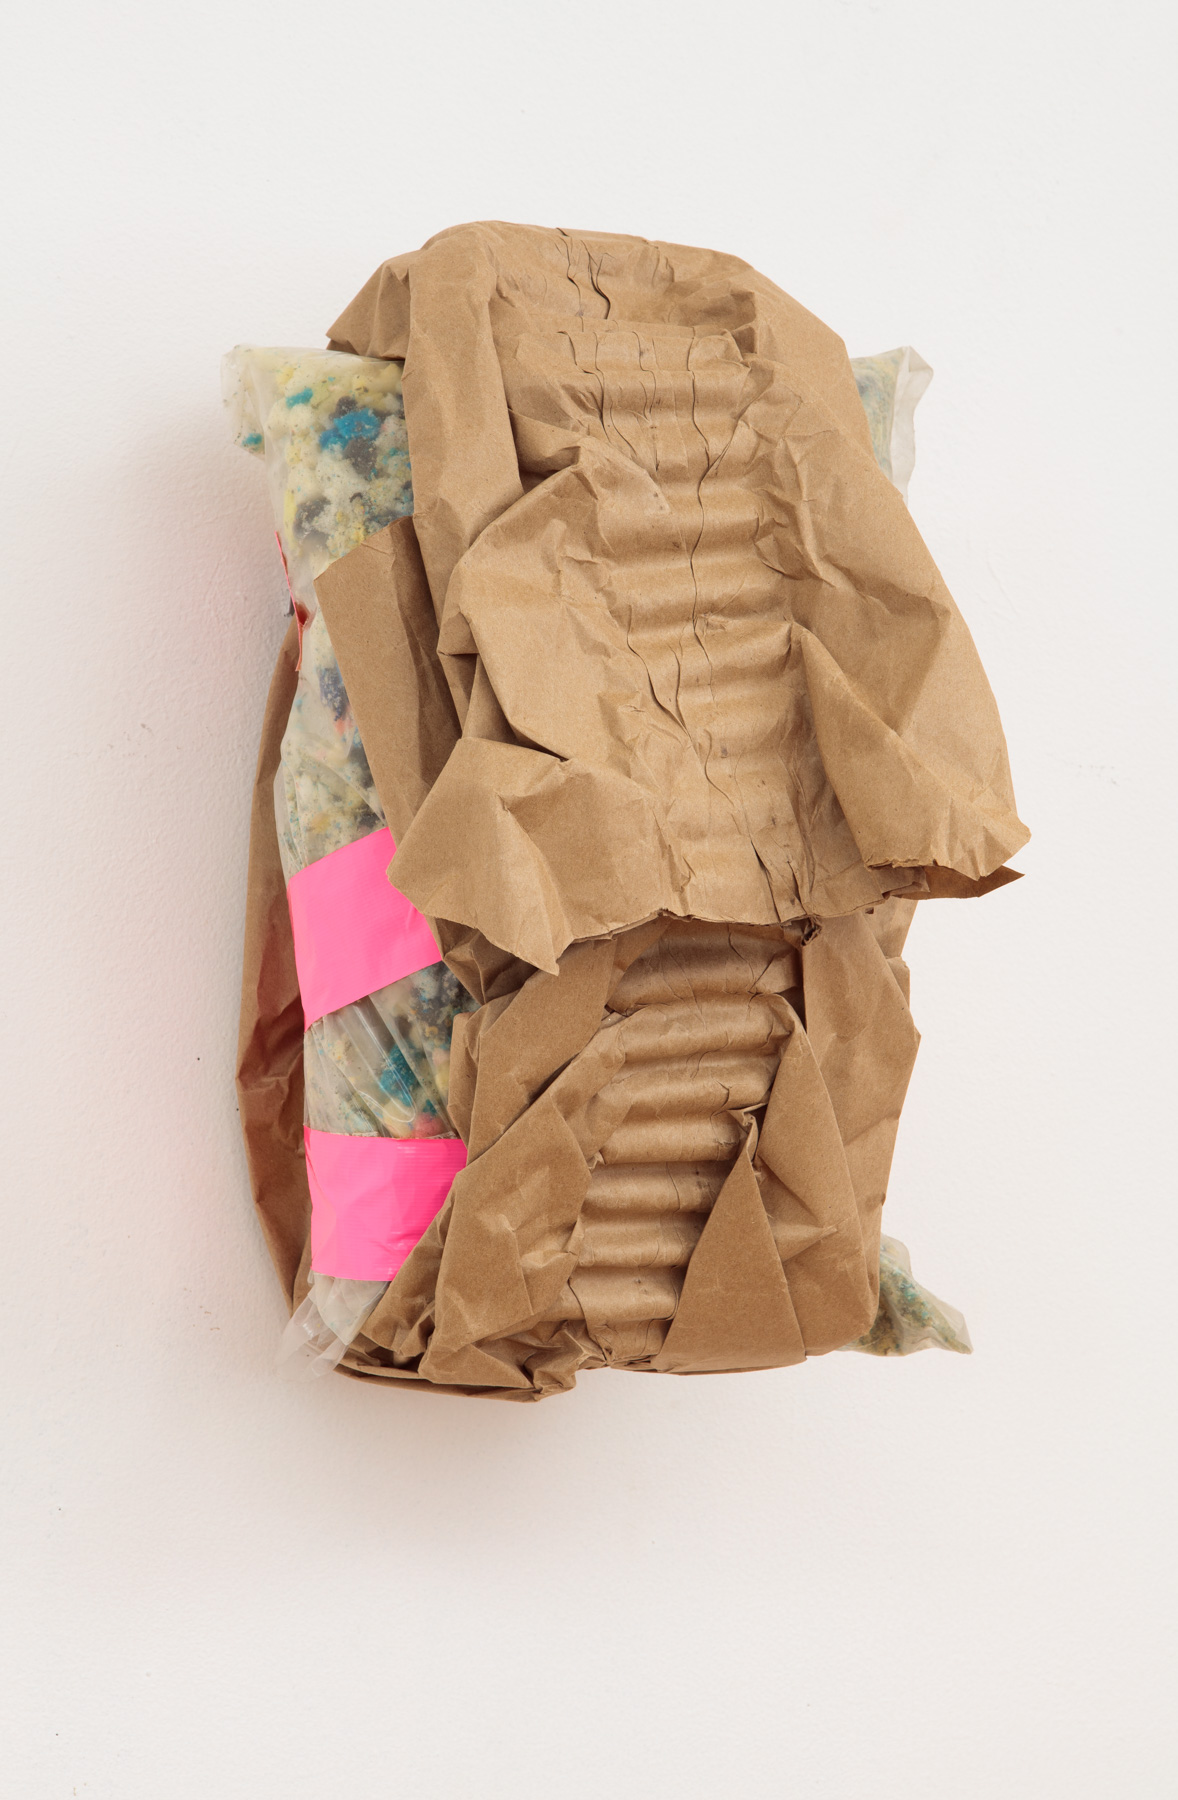 brown paper wrapped around a plastic bag of stuffing foam